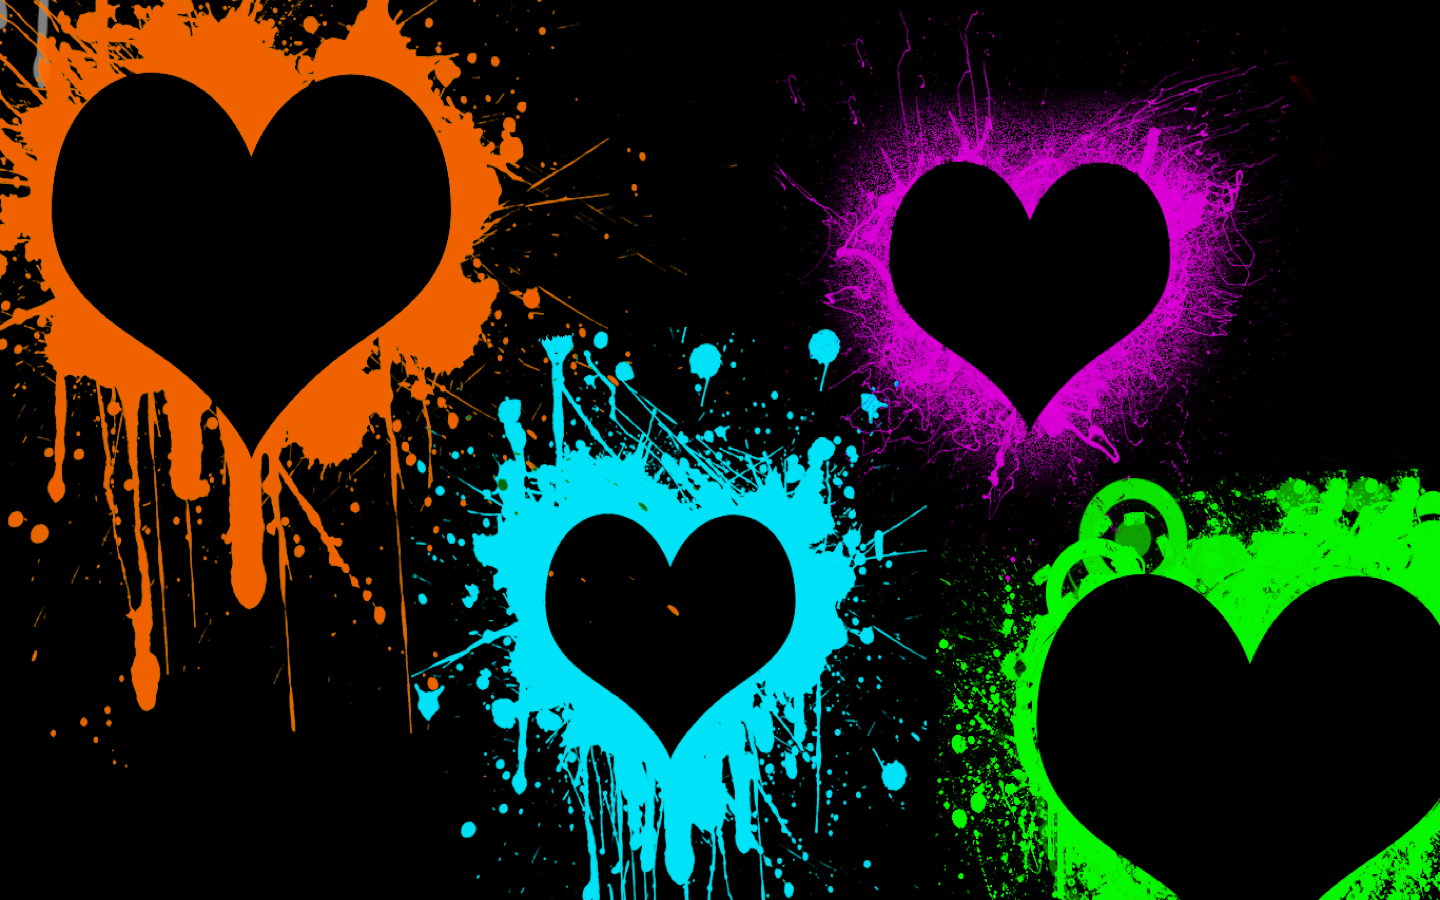 painted hearts colourful painting image